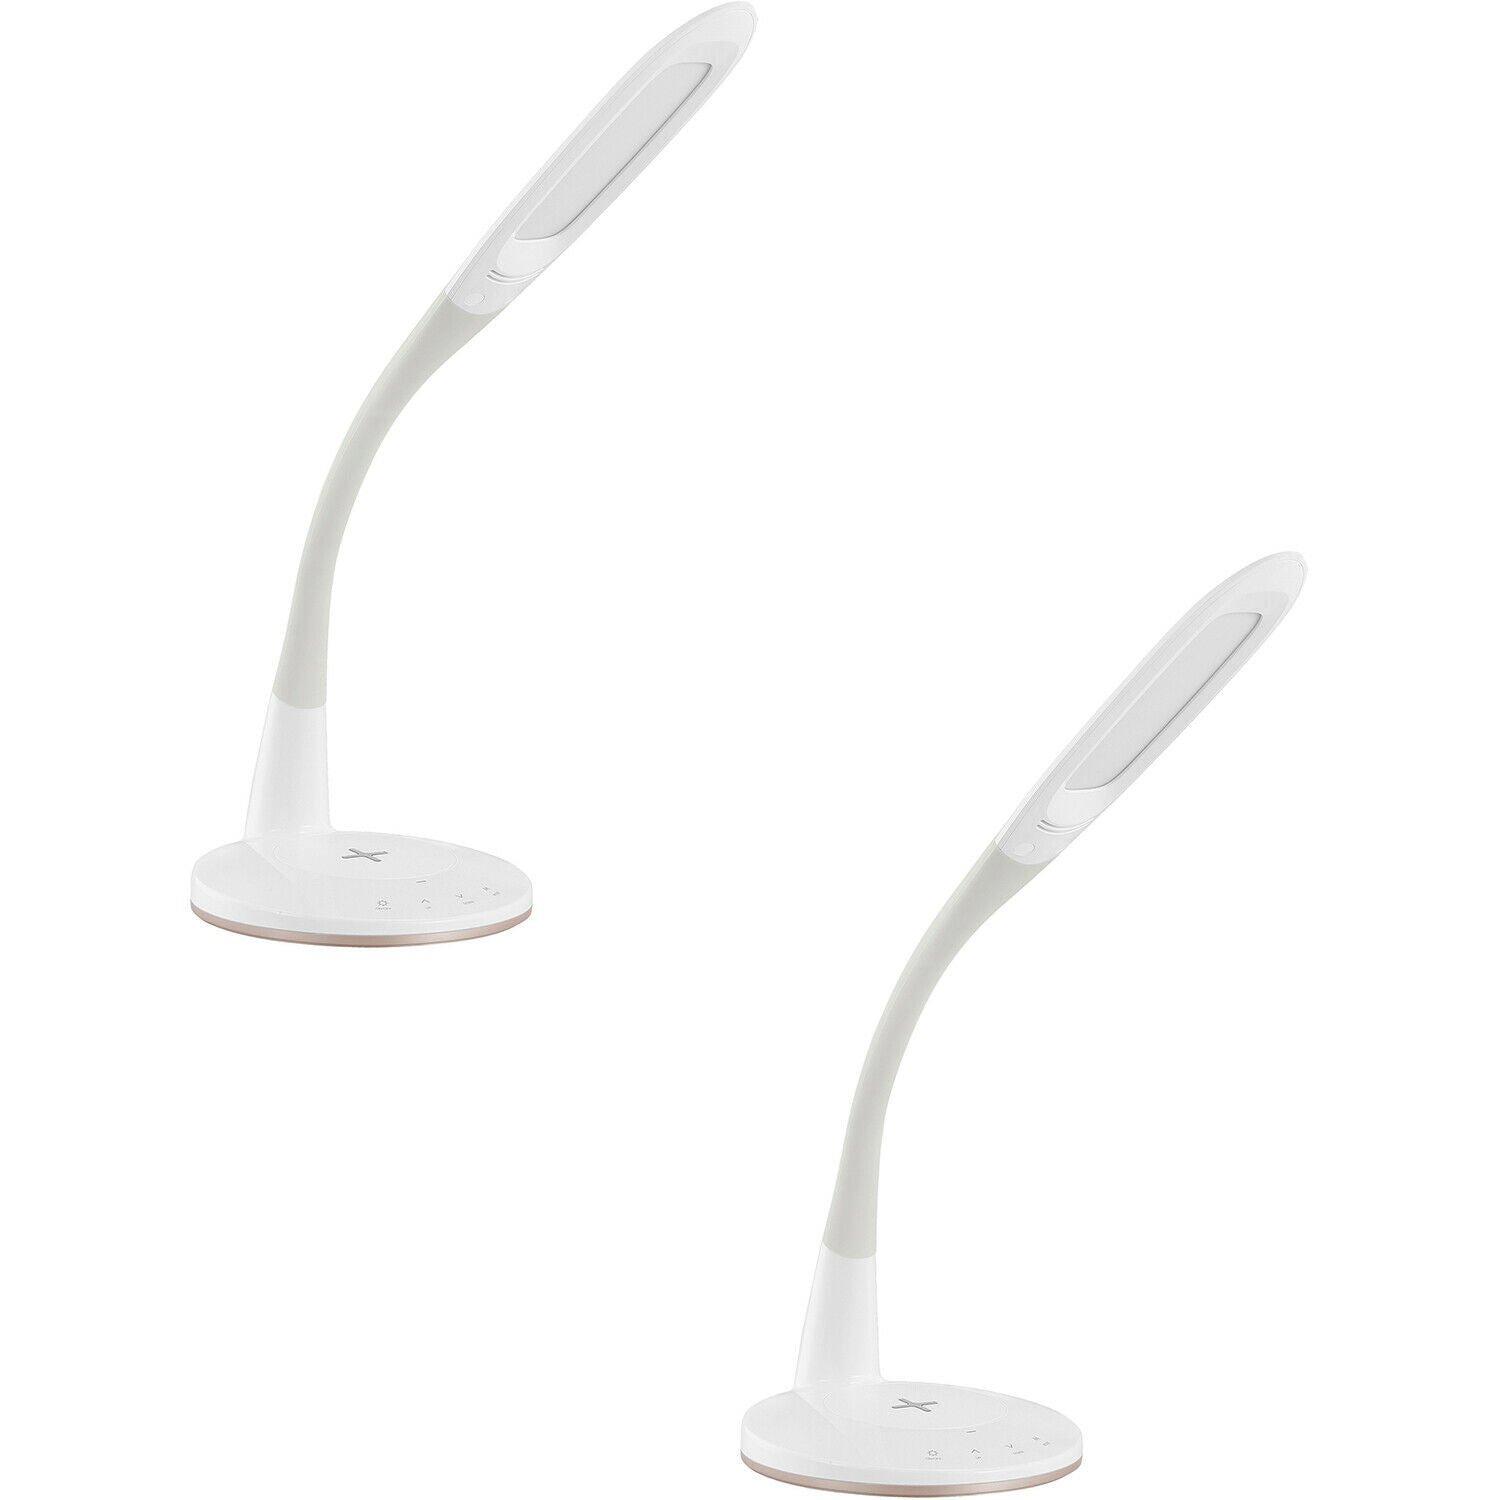 2 PACK Table Desk Lamp Colour White Touch On/Off Dimming Bulb LED 3.7W Included